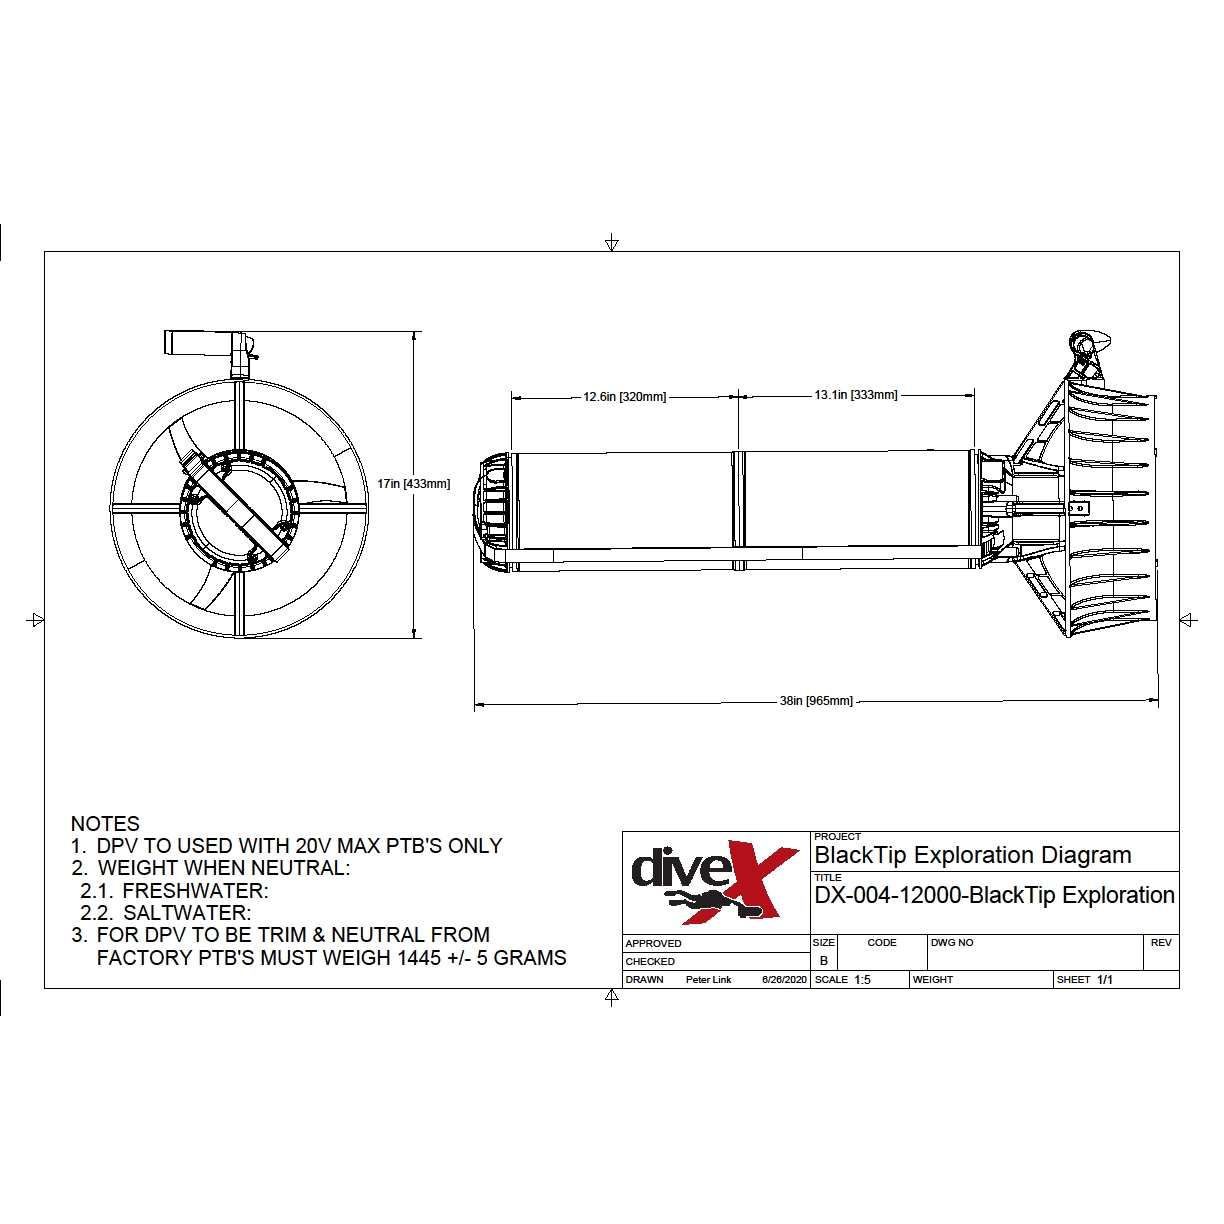 Diagram and dimensions of Dive Xtras BlackTip Exploration underwater scooter.